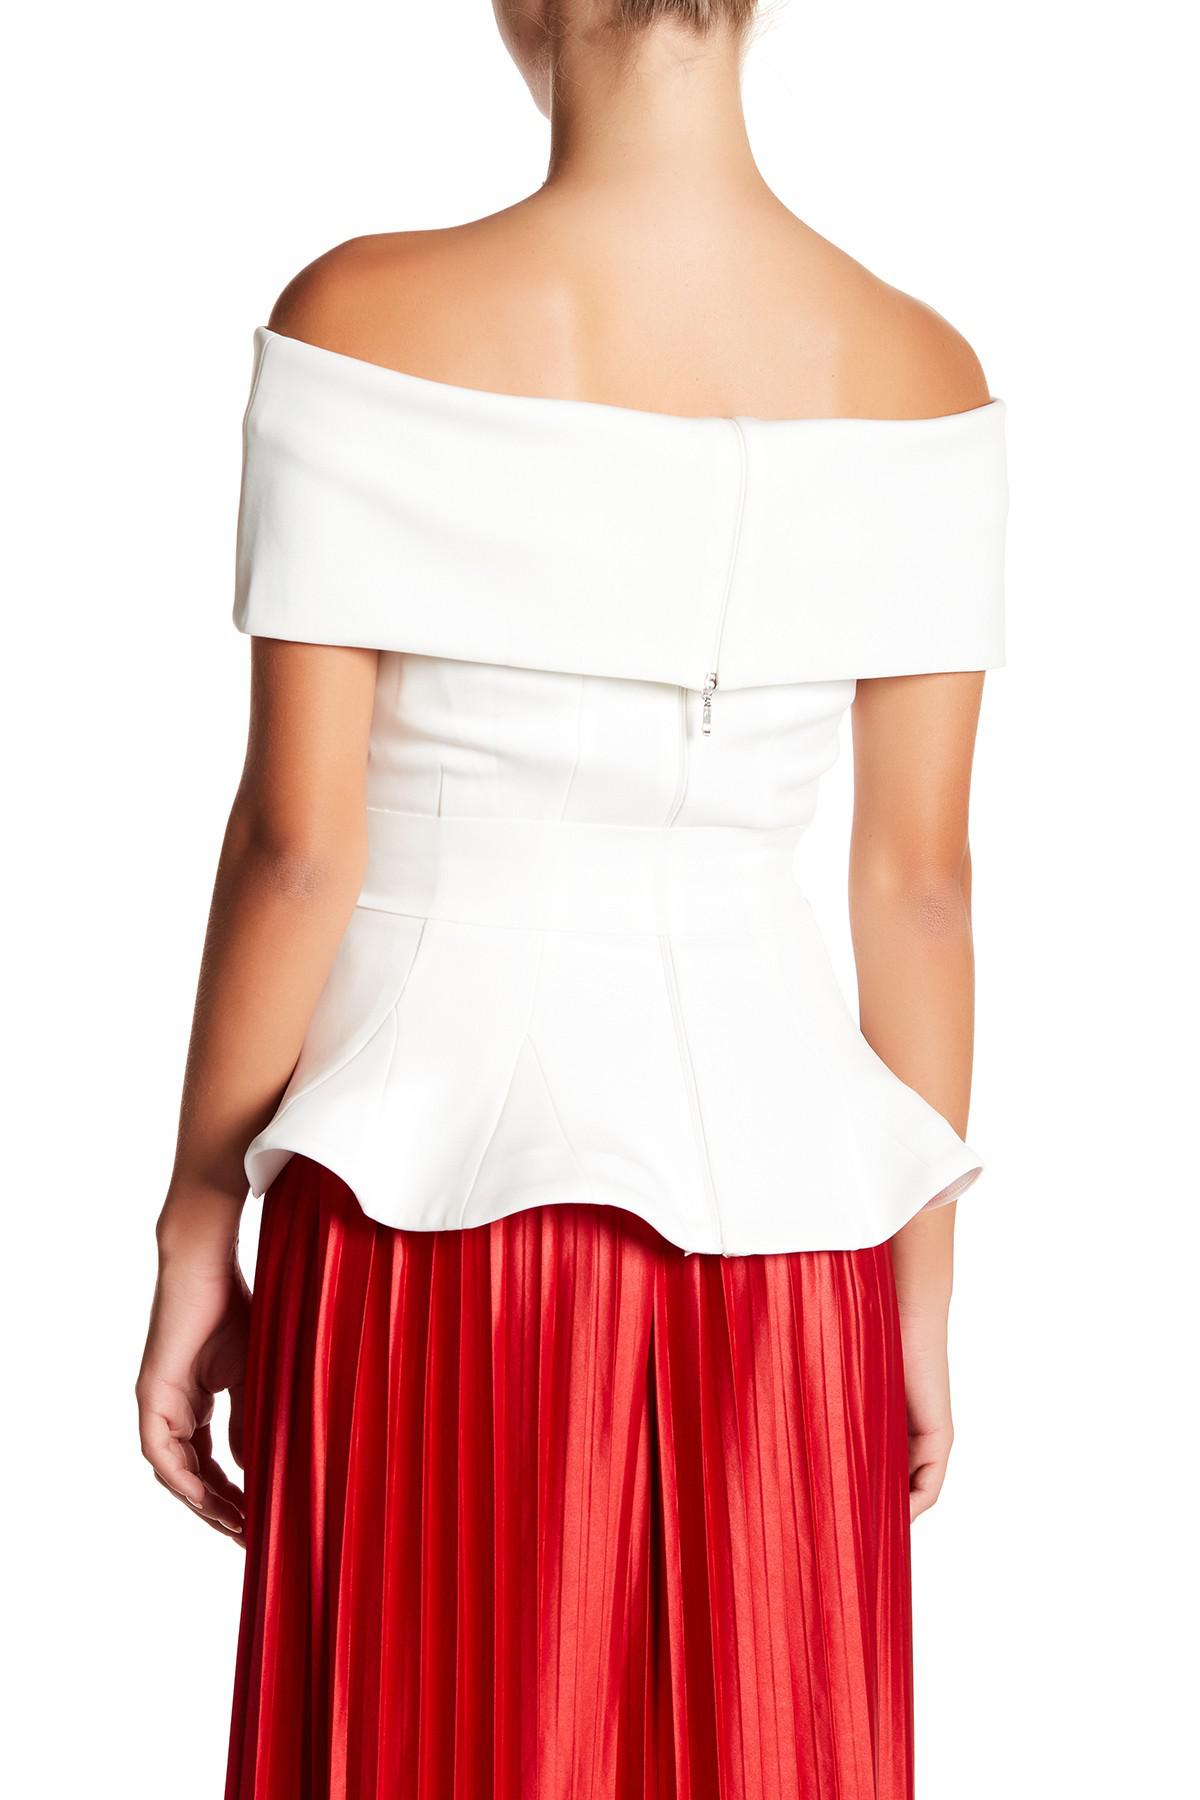 Gracia Folded Off-the-shoulder Peplum in White | Lyst